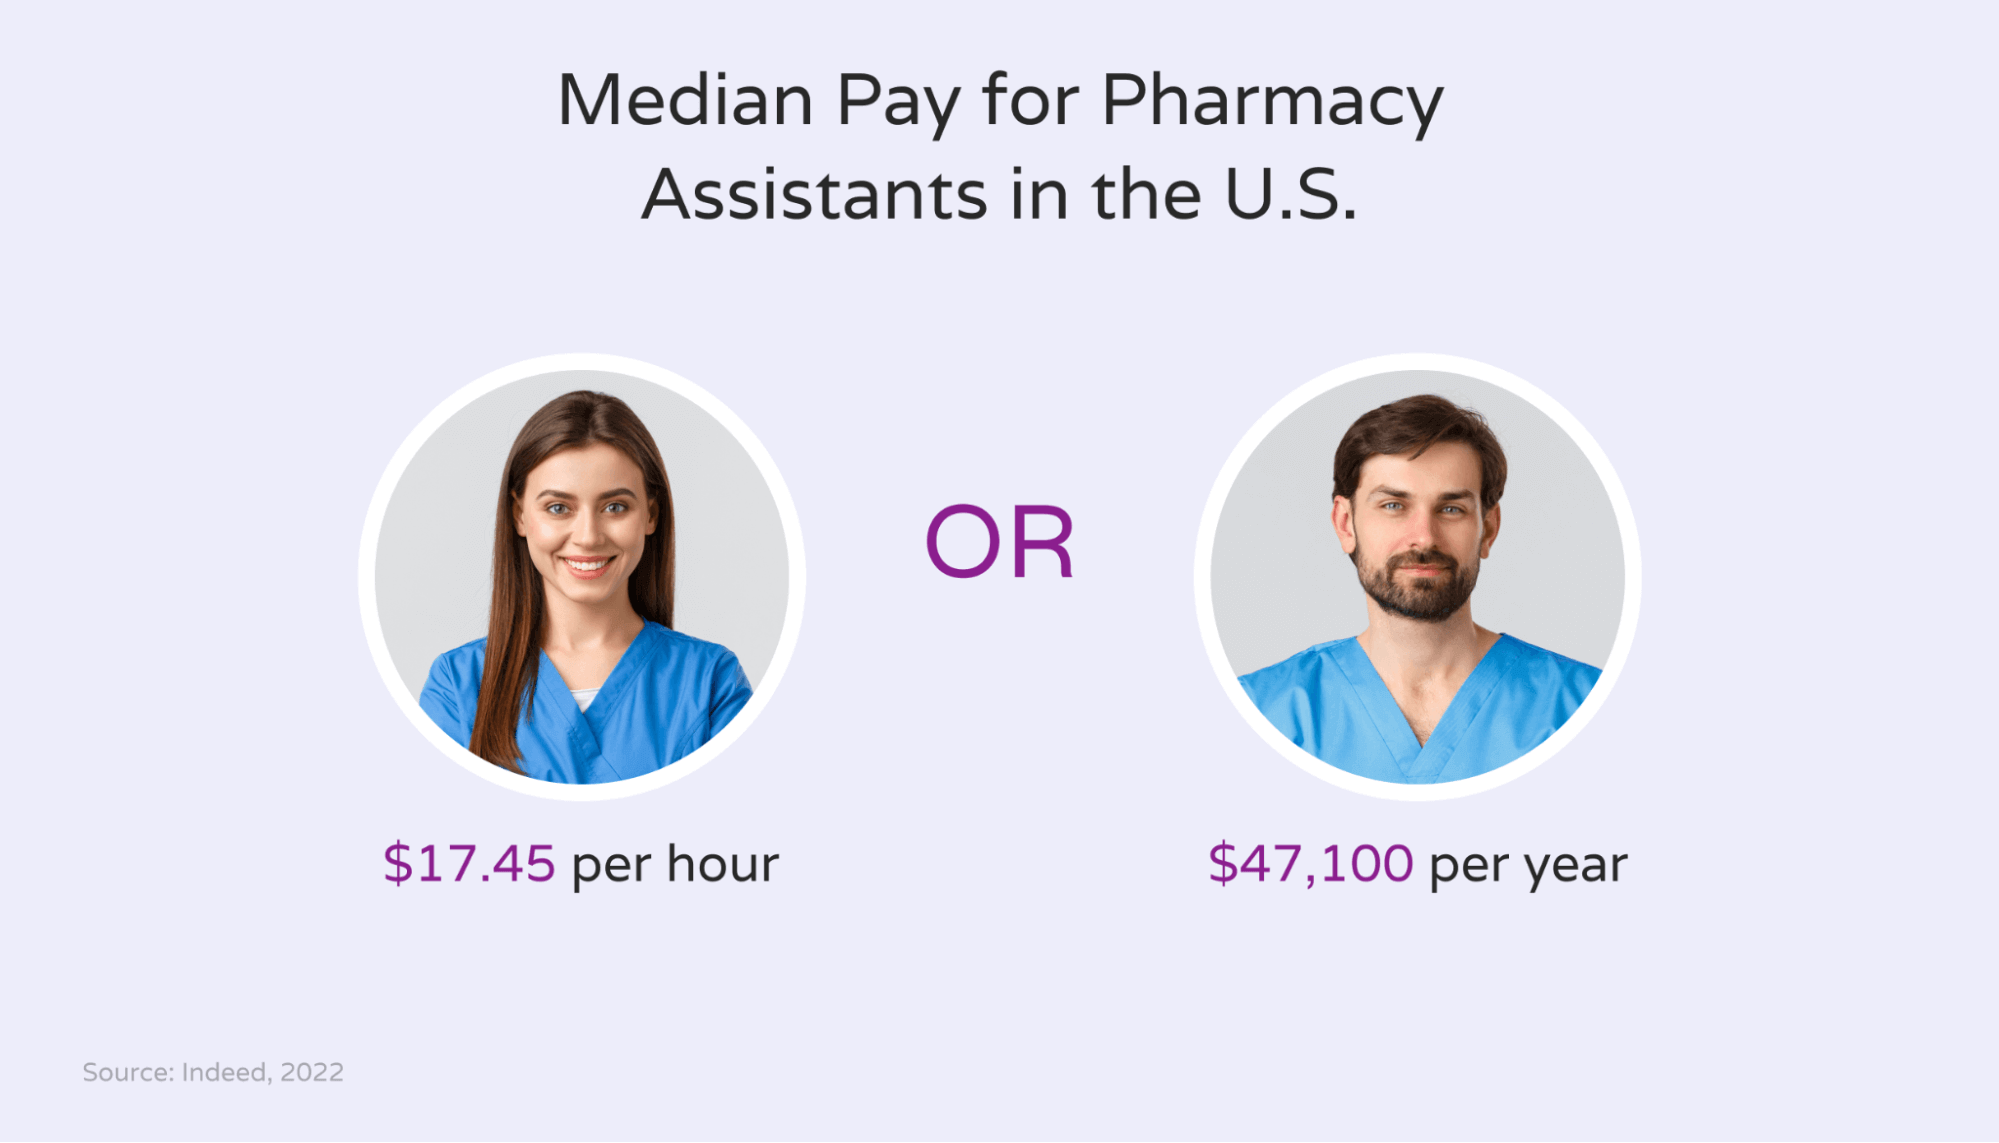  image showing how much pharmacy assistants earn in the U.S.